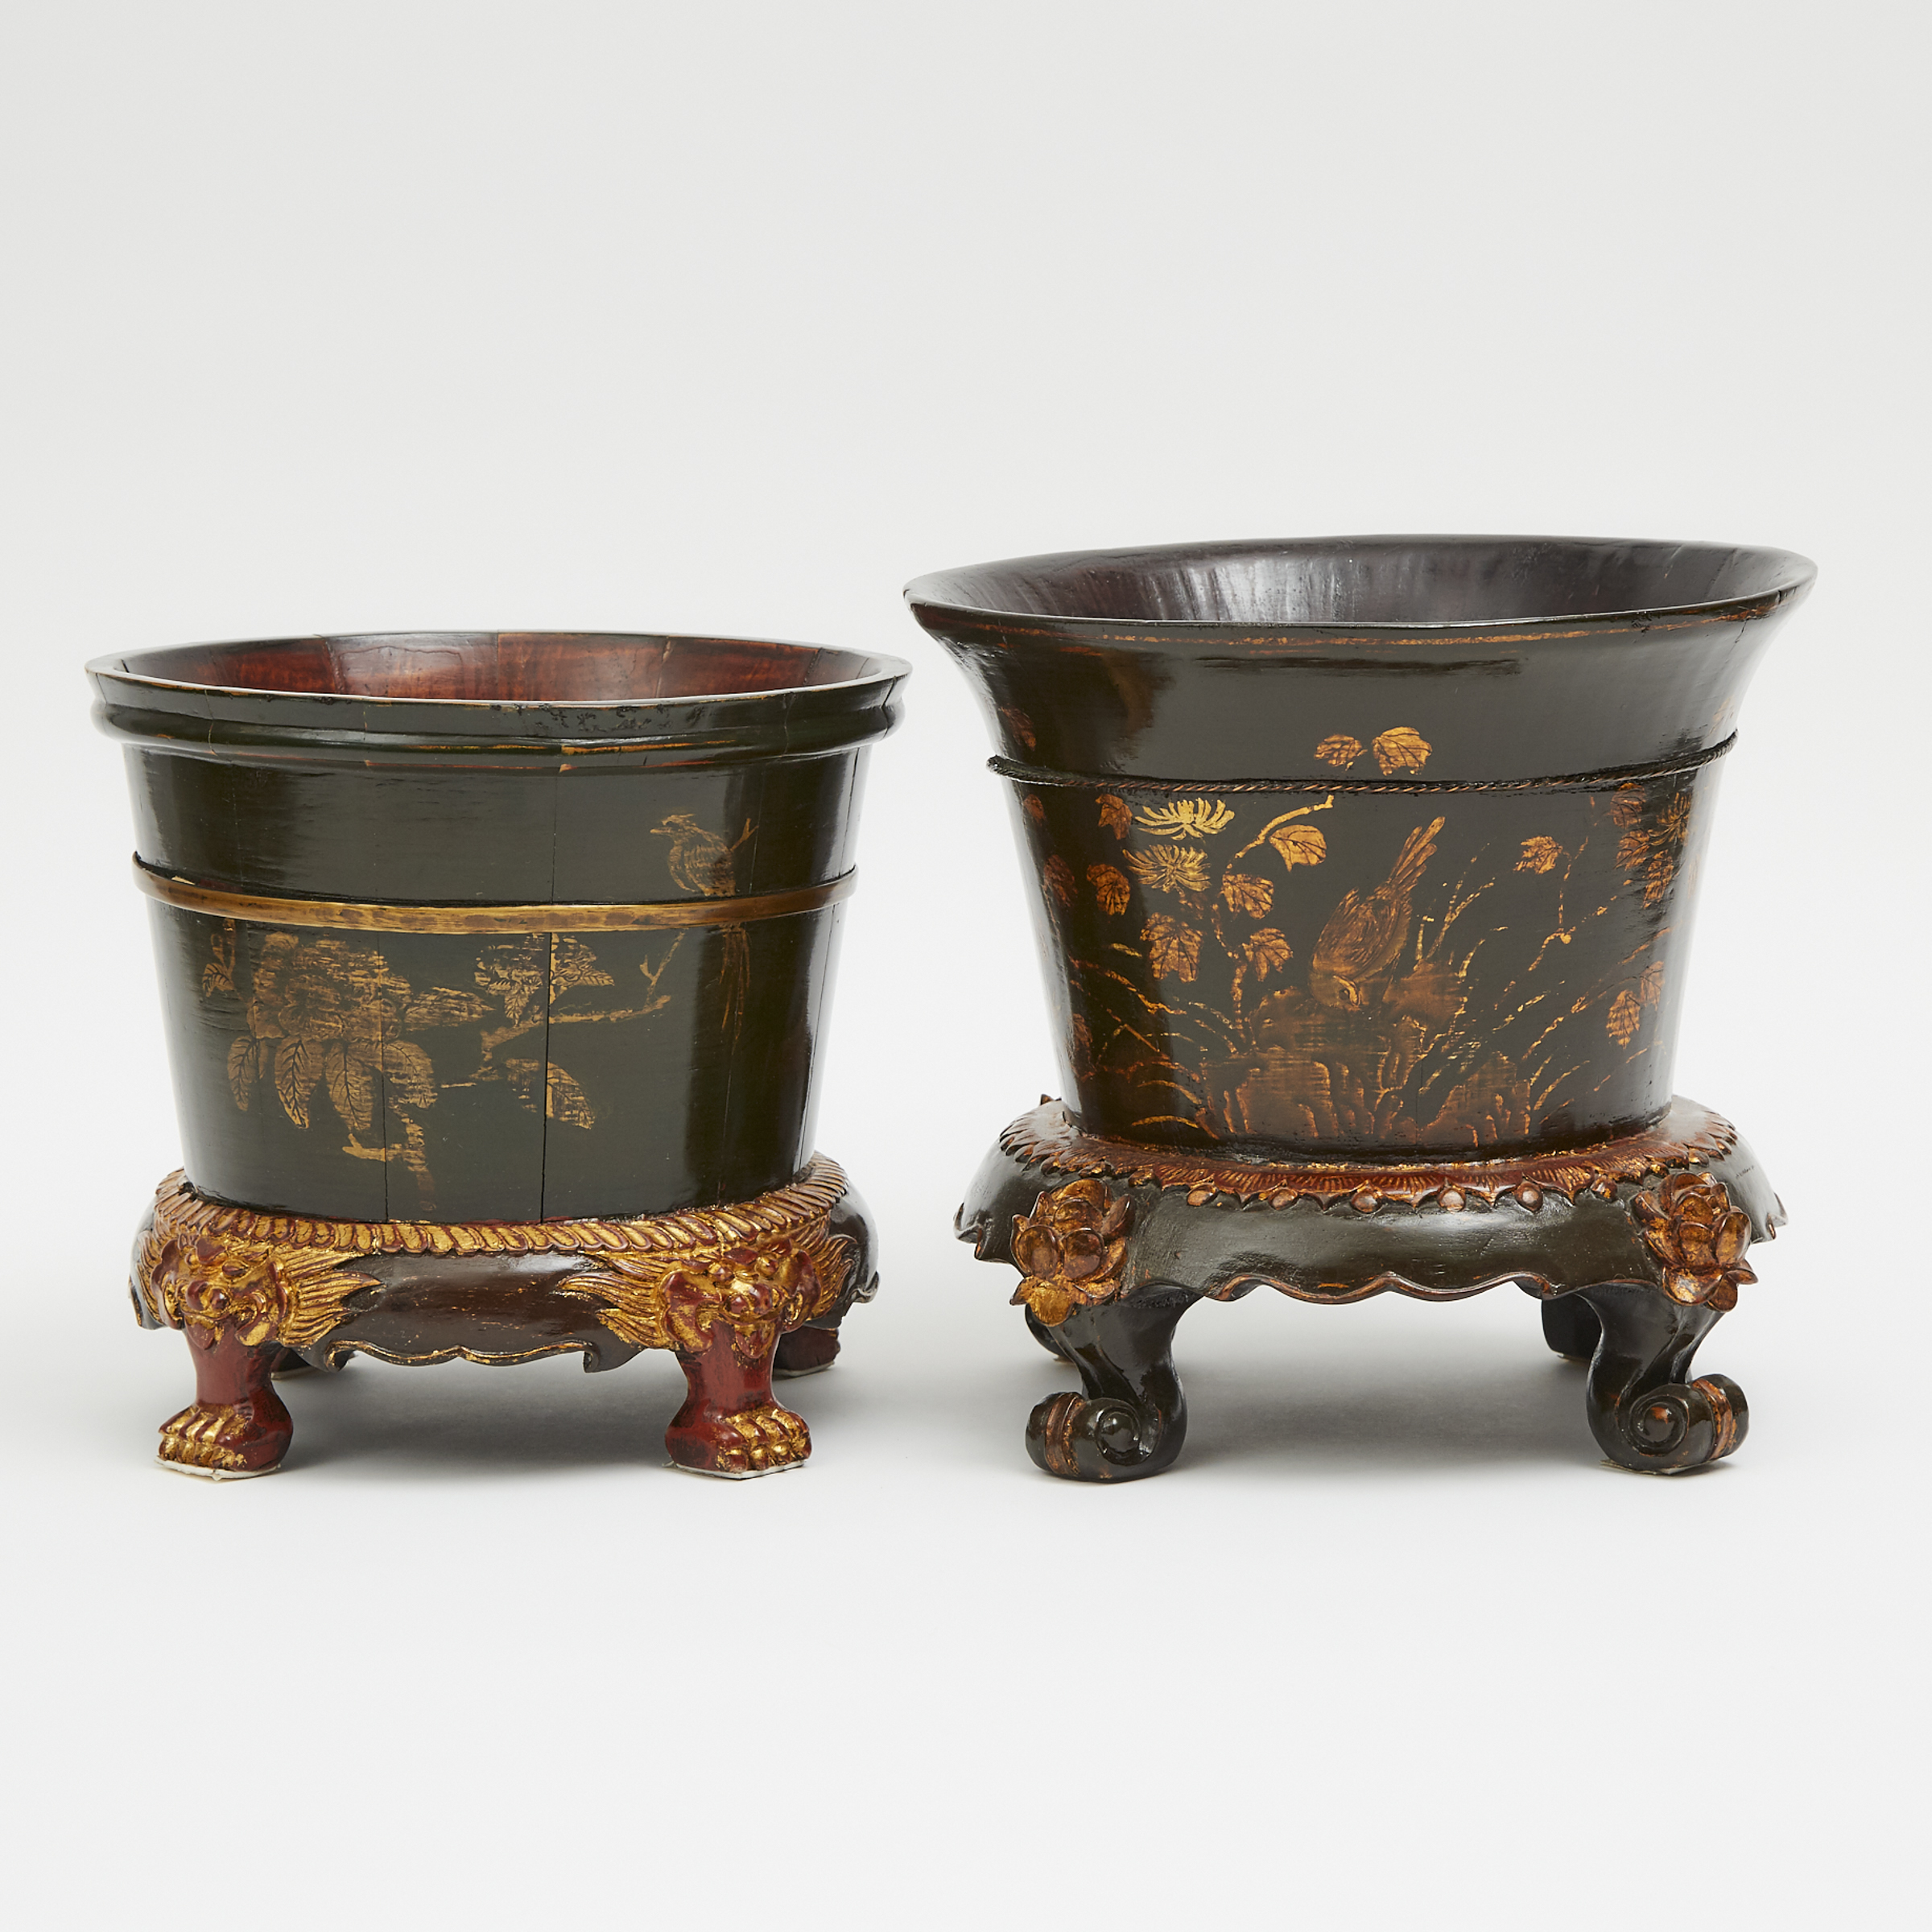 Two Chinese Gilt-Decorated Lacquer Flower Pots, 19th Century